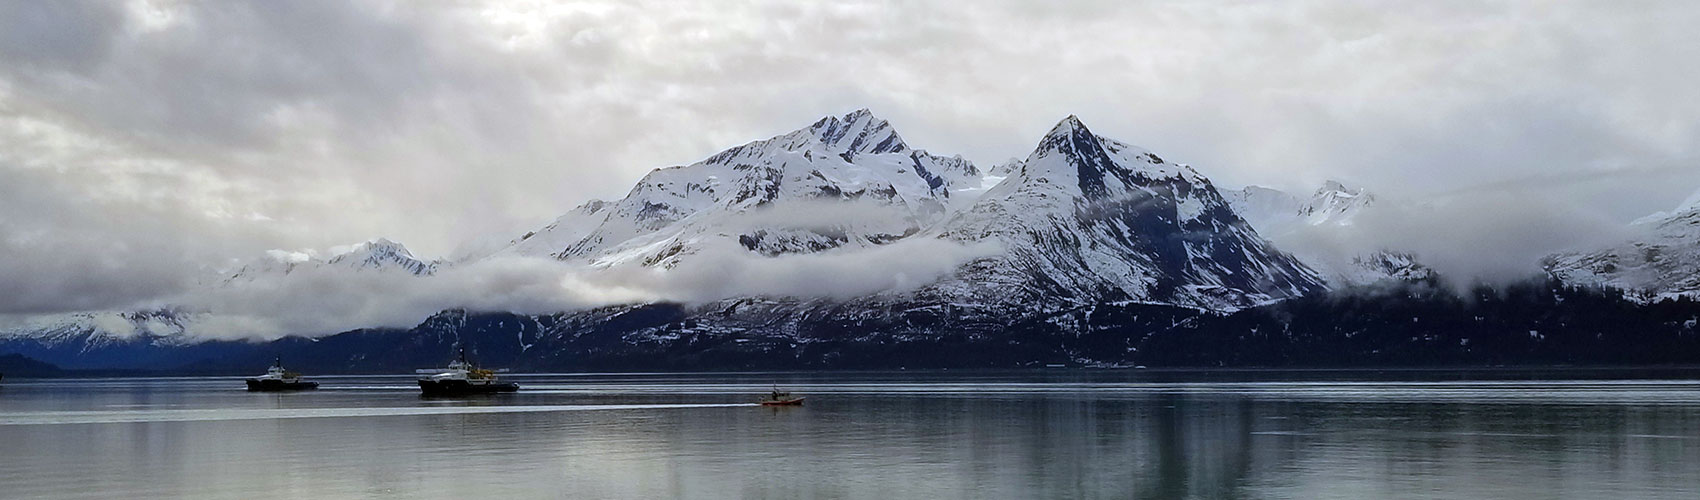 Snow covered mountains on the water in Valdez Alaska